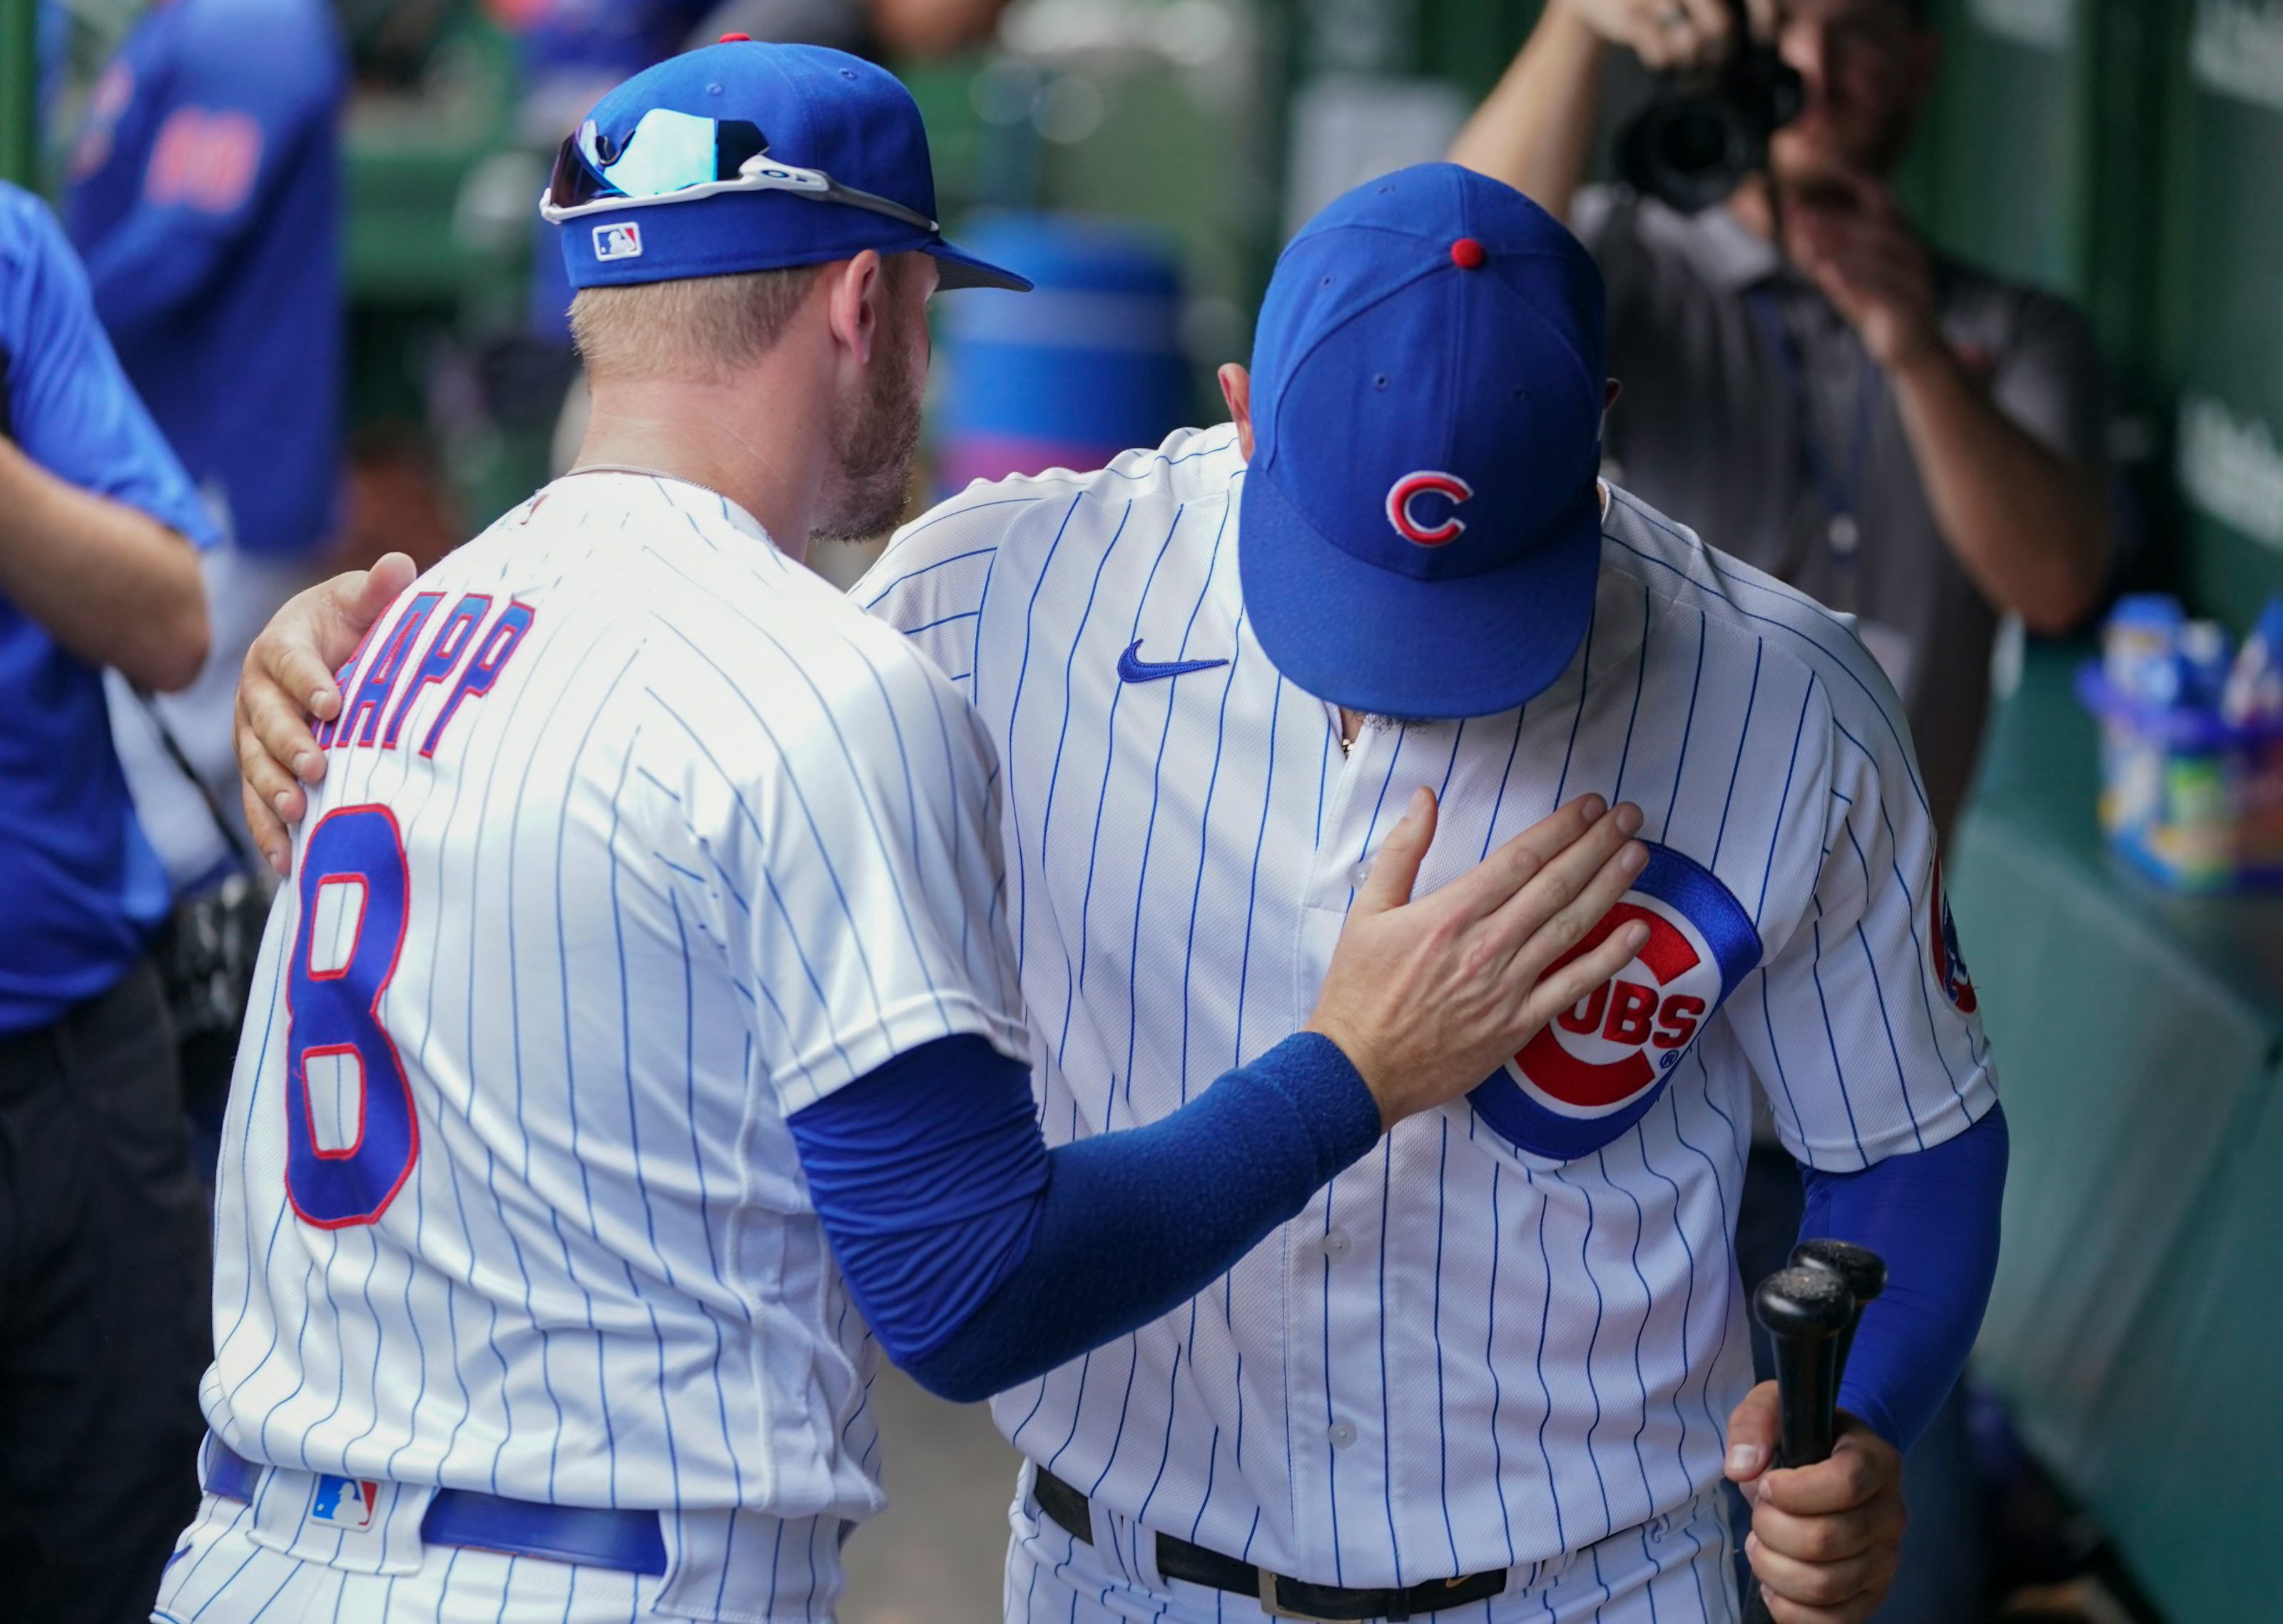 Rumors about the Chicago Cubs